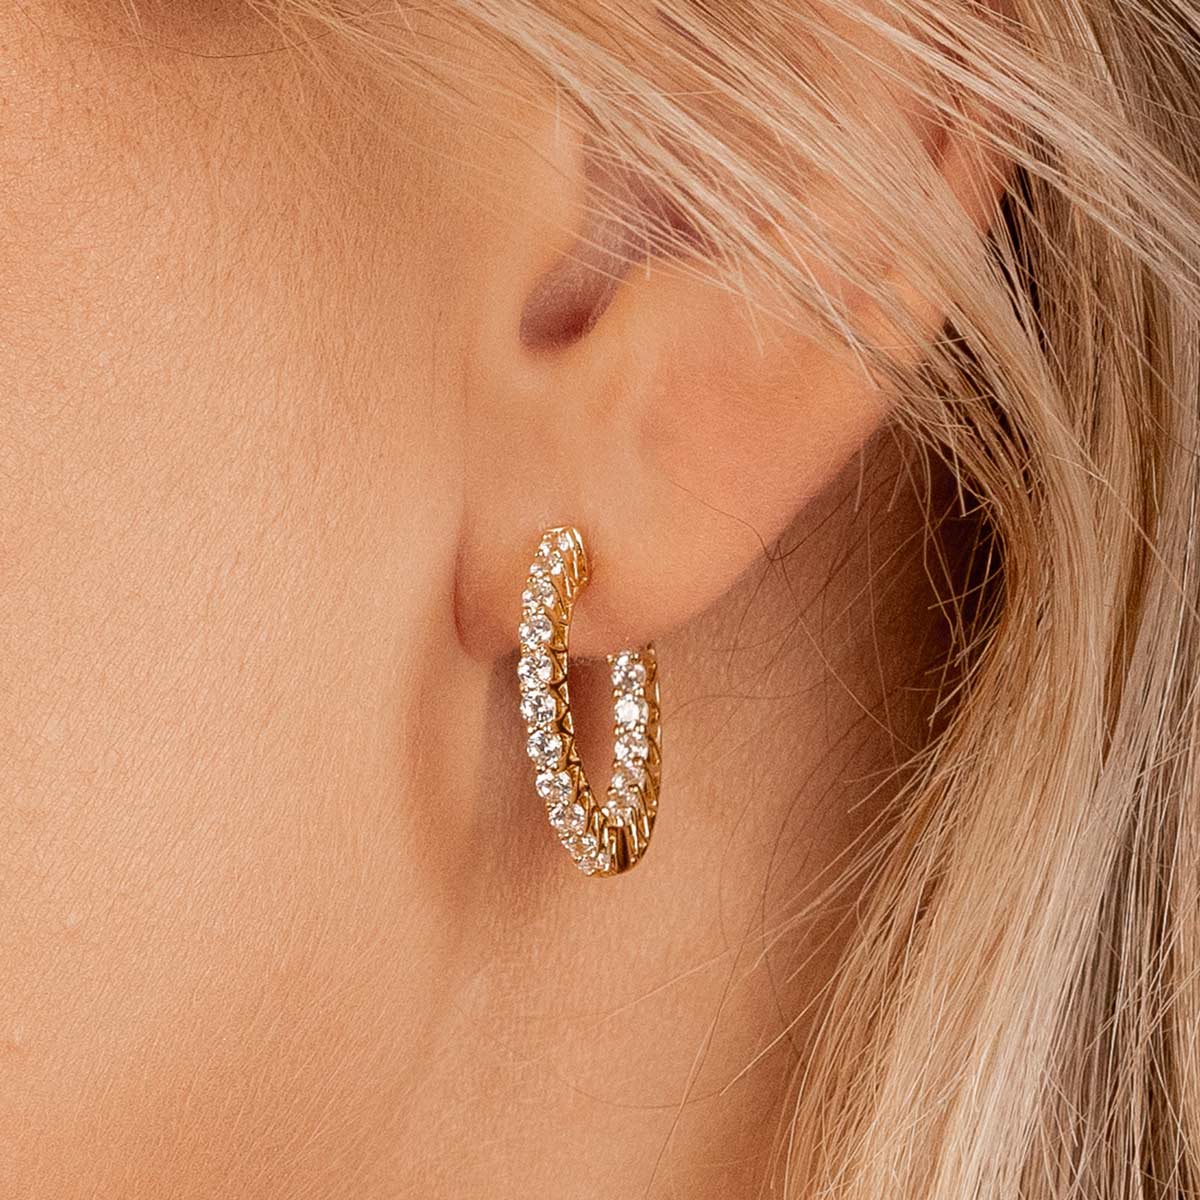 Affordable gold hoop earrings with stones